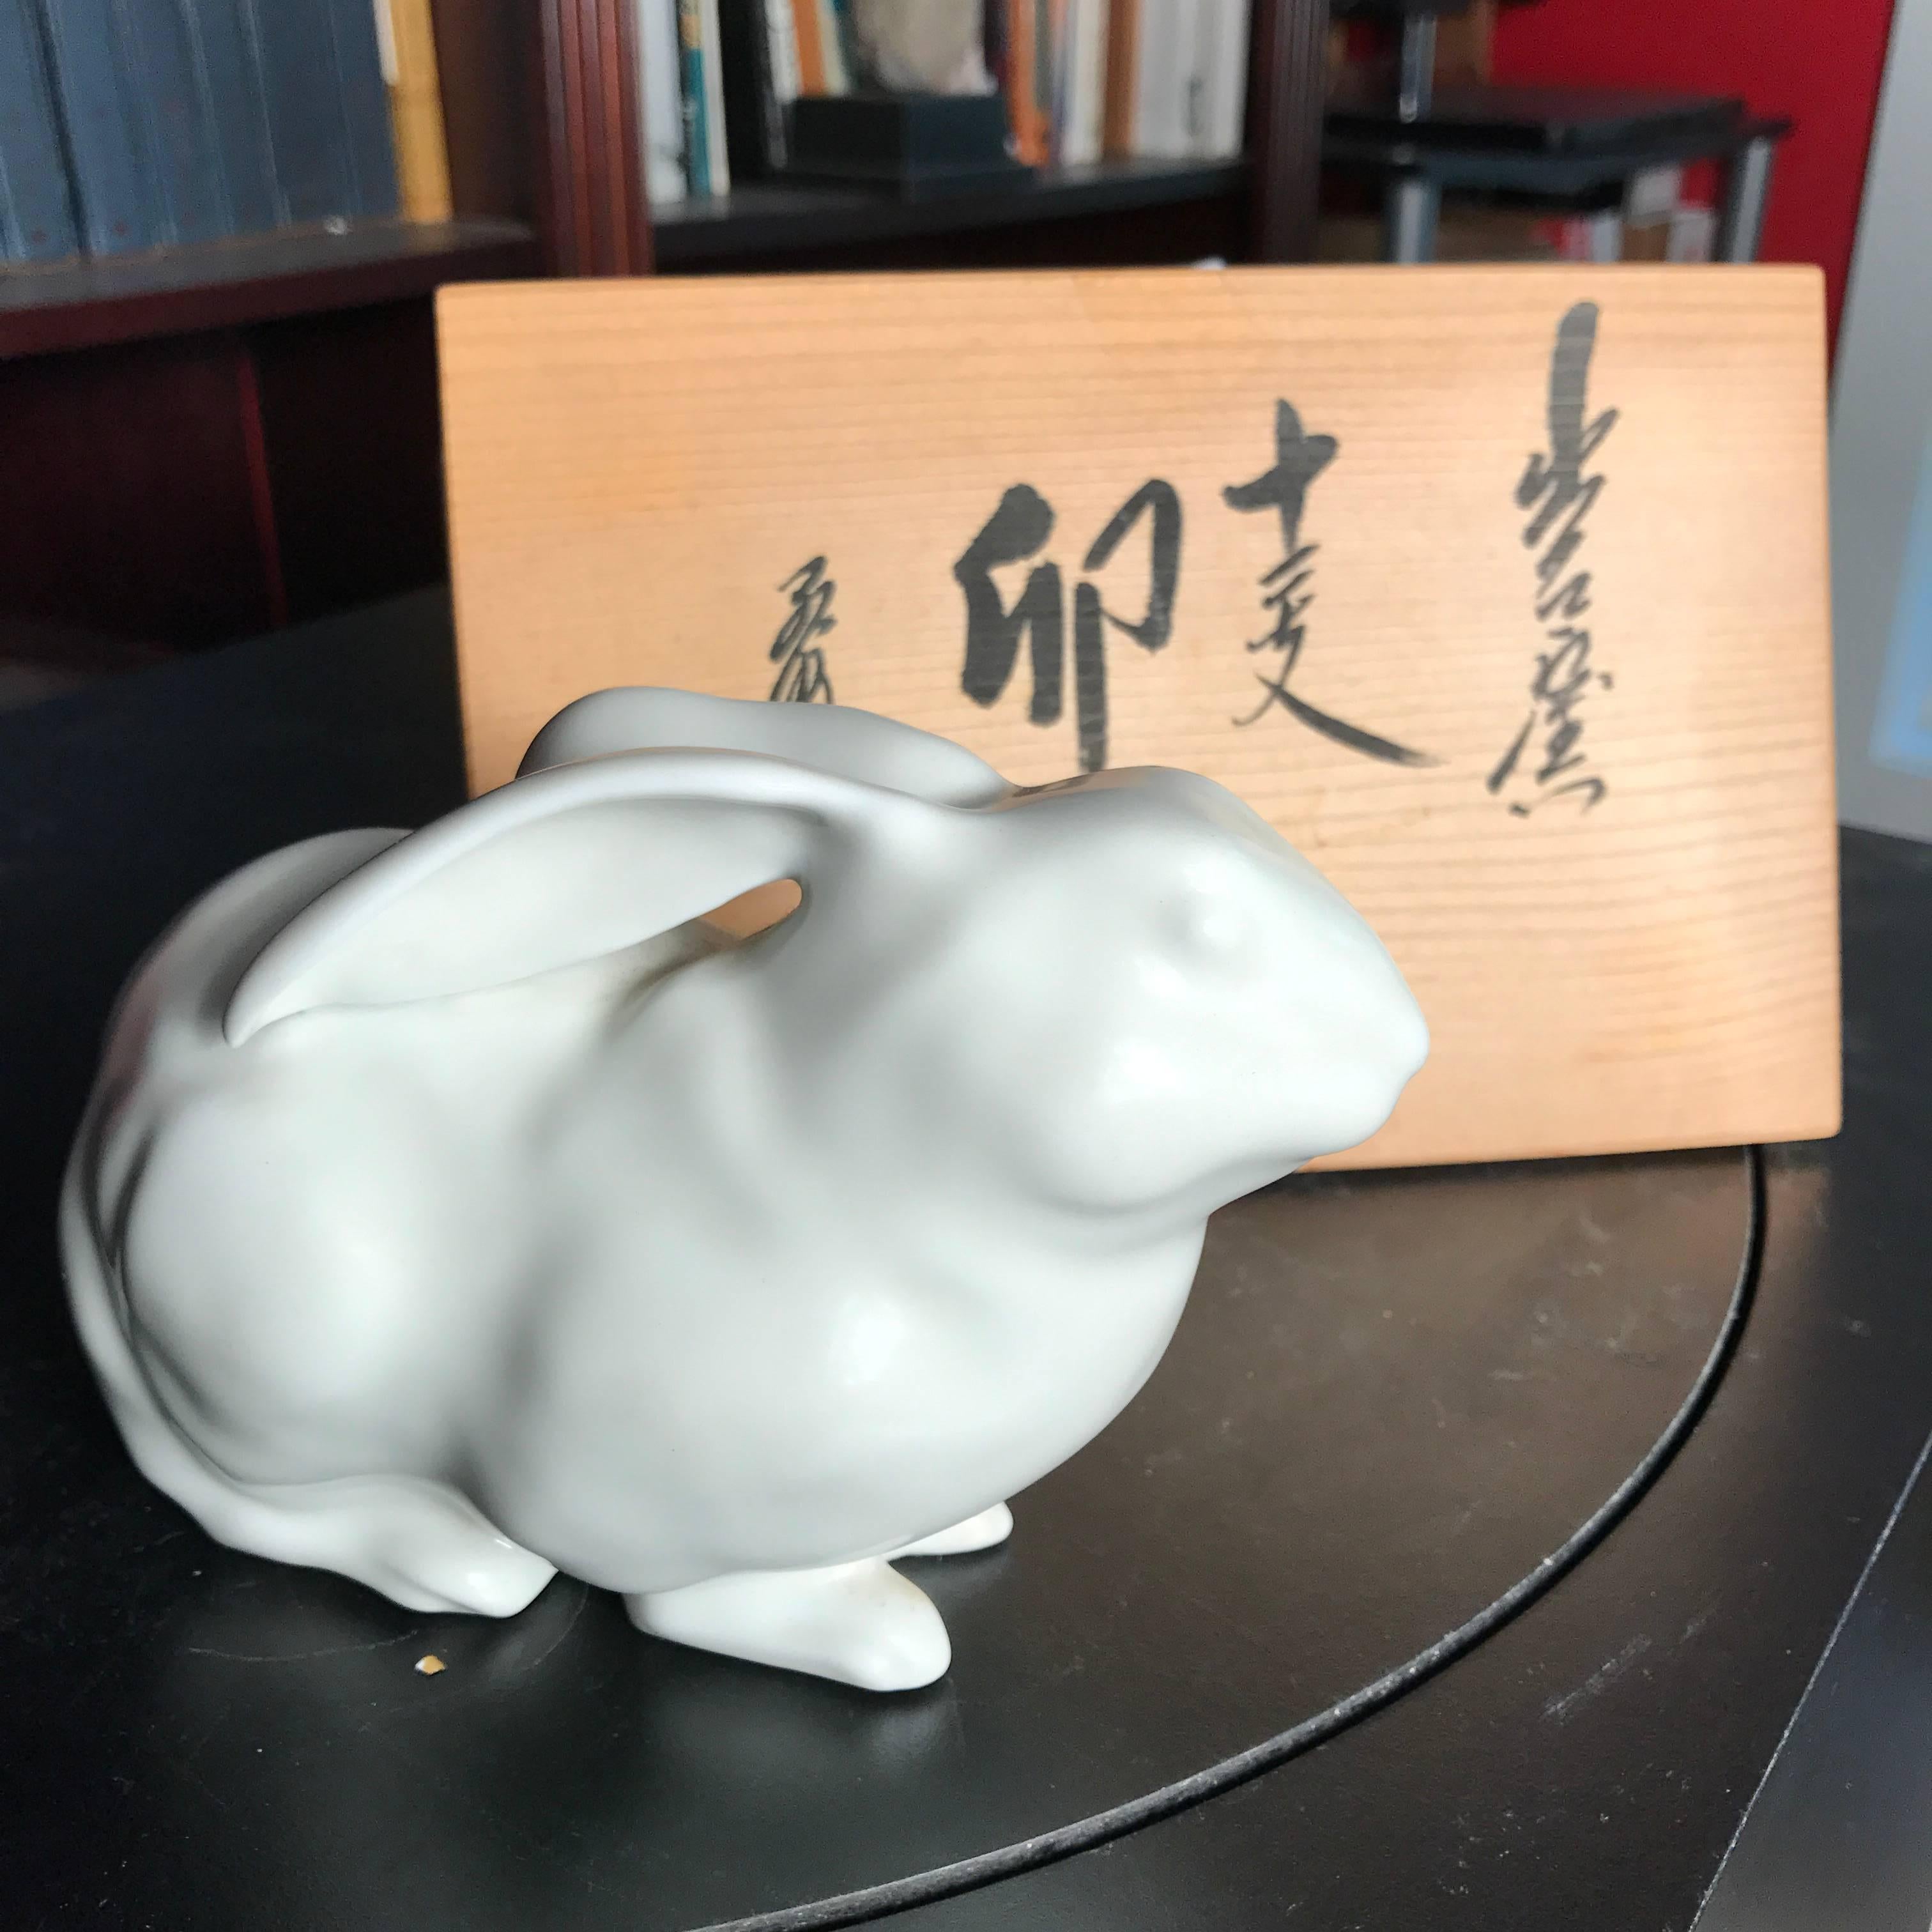 Japan Big Ear Rabbit Pure White Mint, Signed and Boxed 2